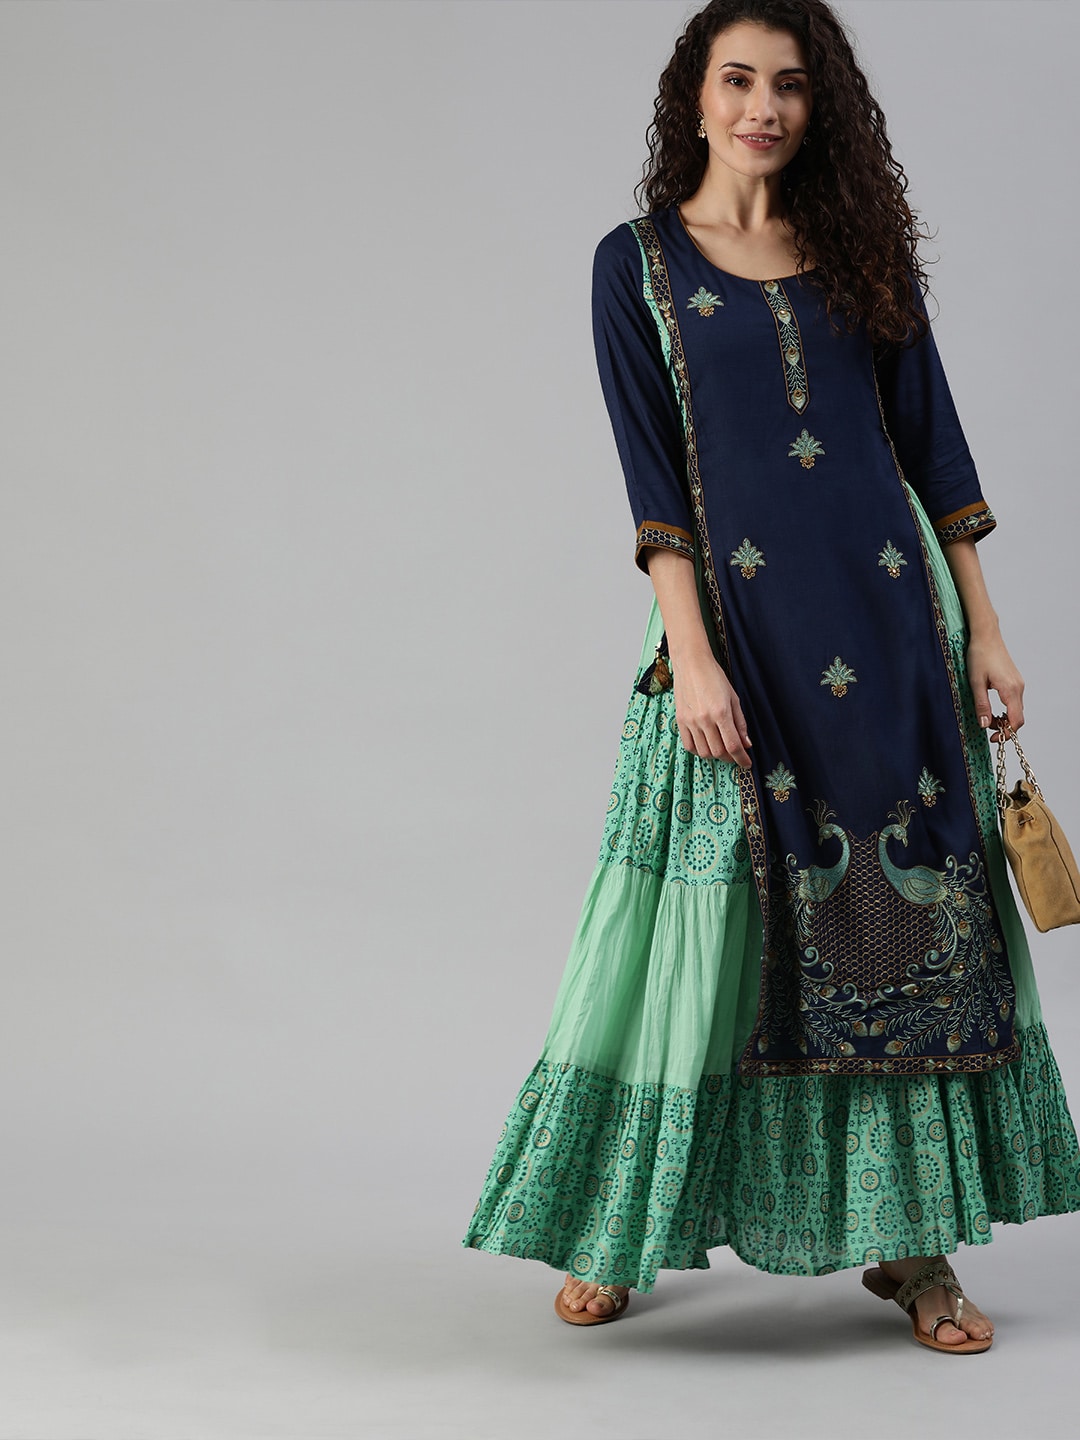 Ishin Women Blue & Sea Green Embroidered Layered A-Line Kurta with Tie-Up Detailing Price in India